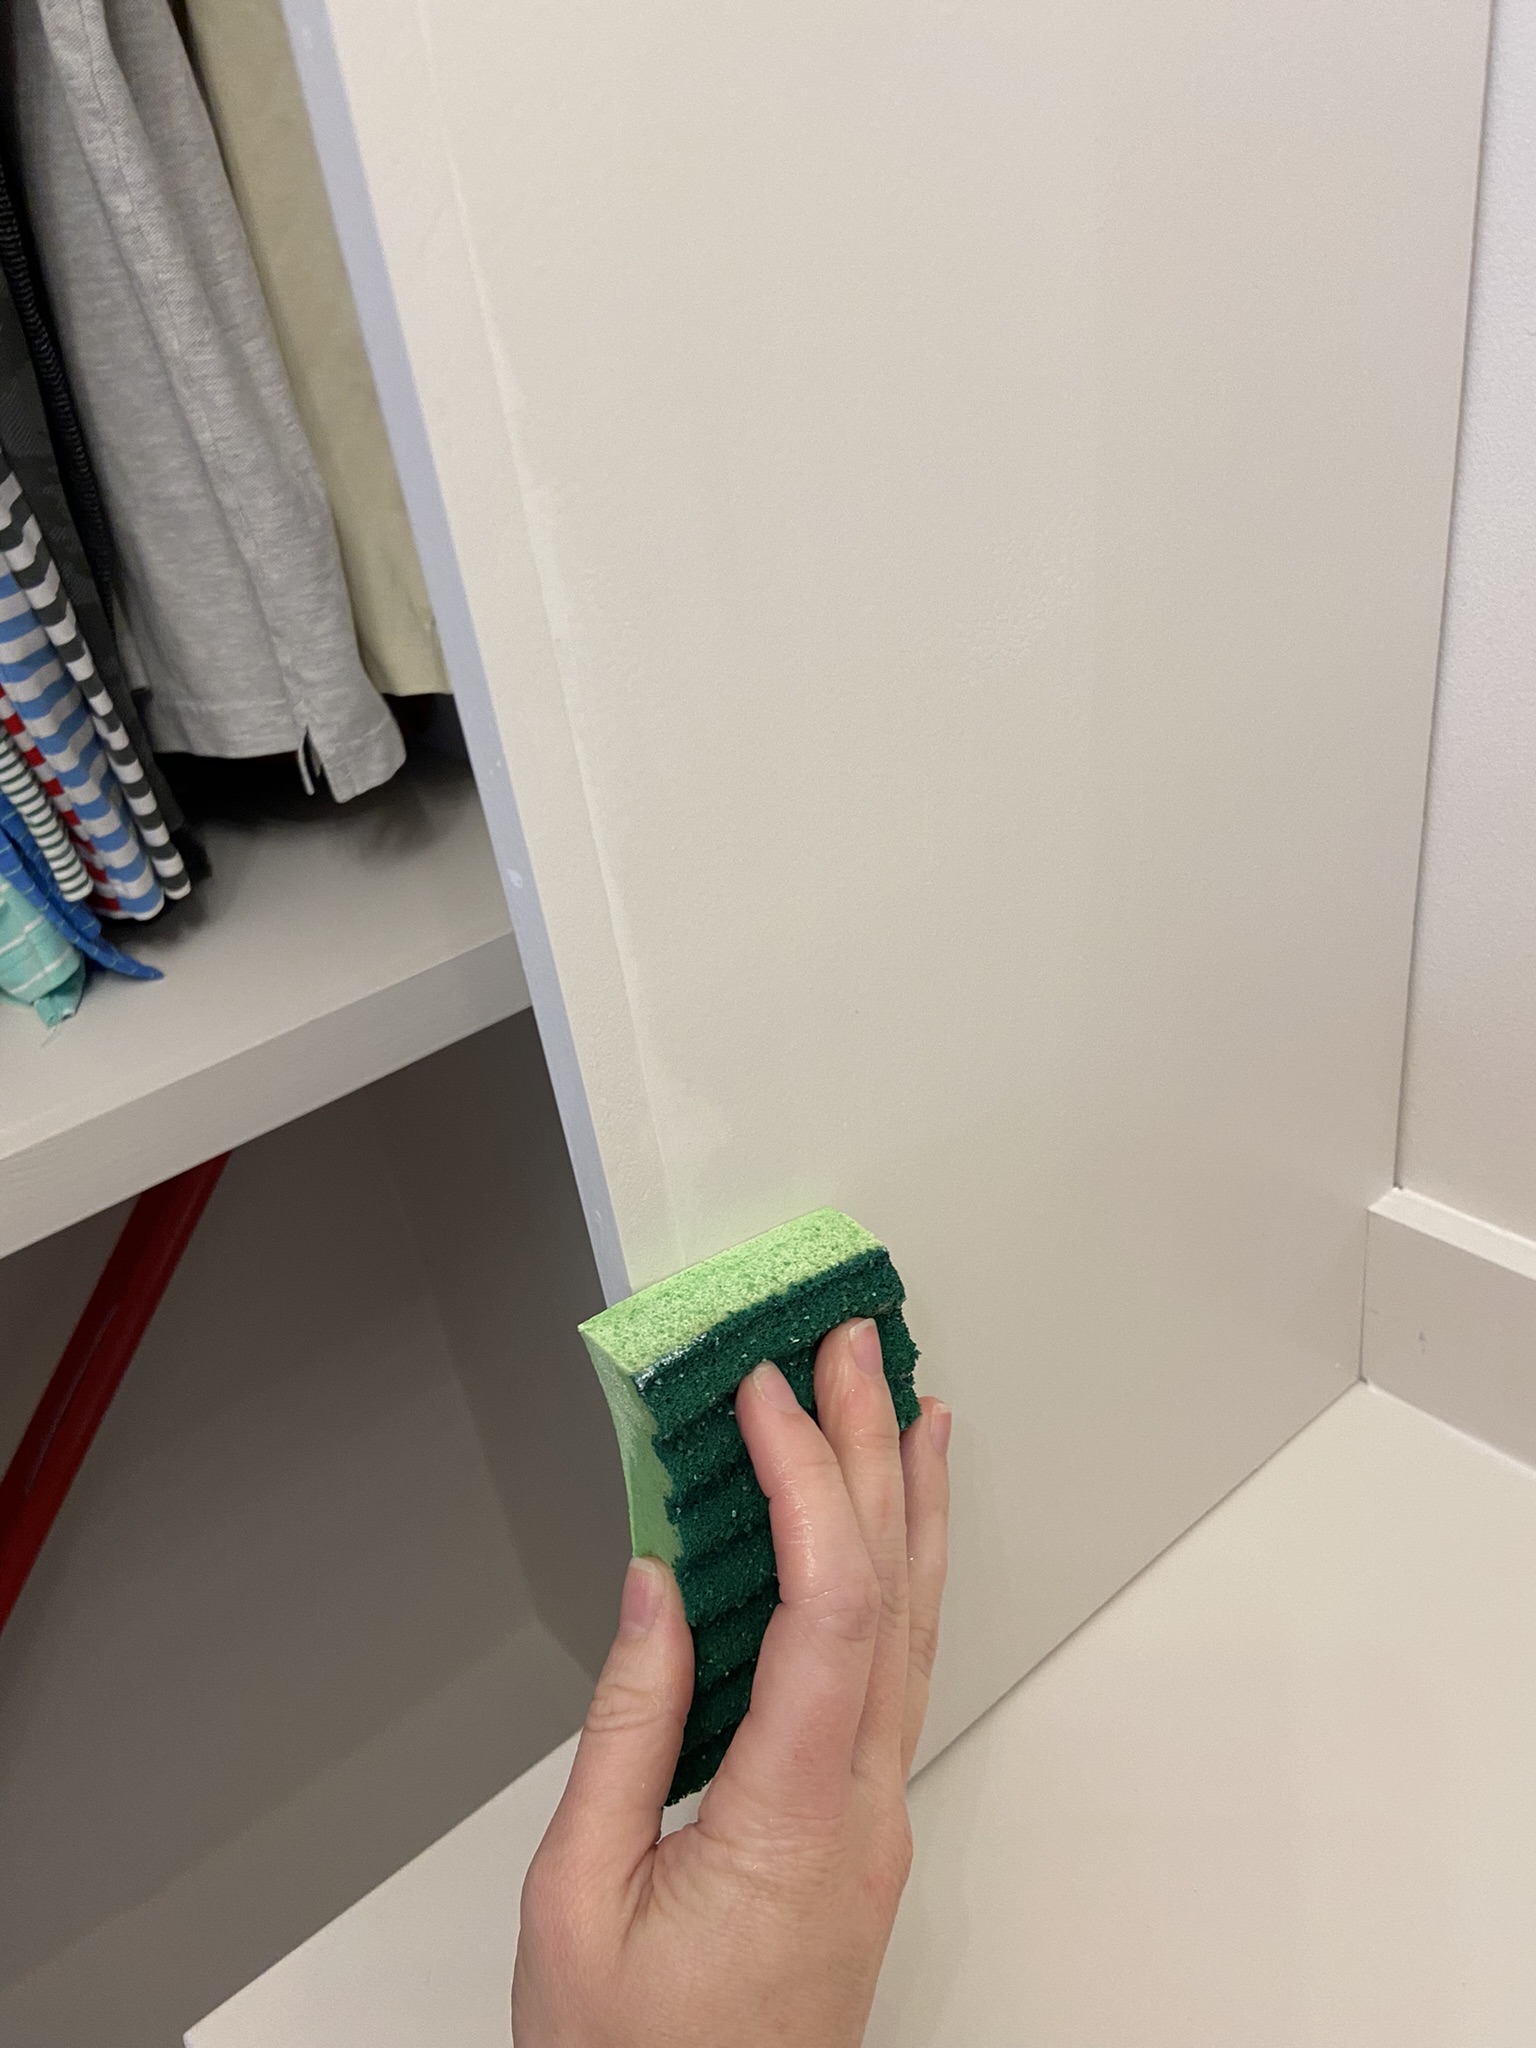 DIY Custom closet makeover, filling wood seams with spackle.